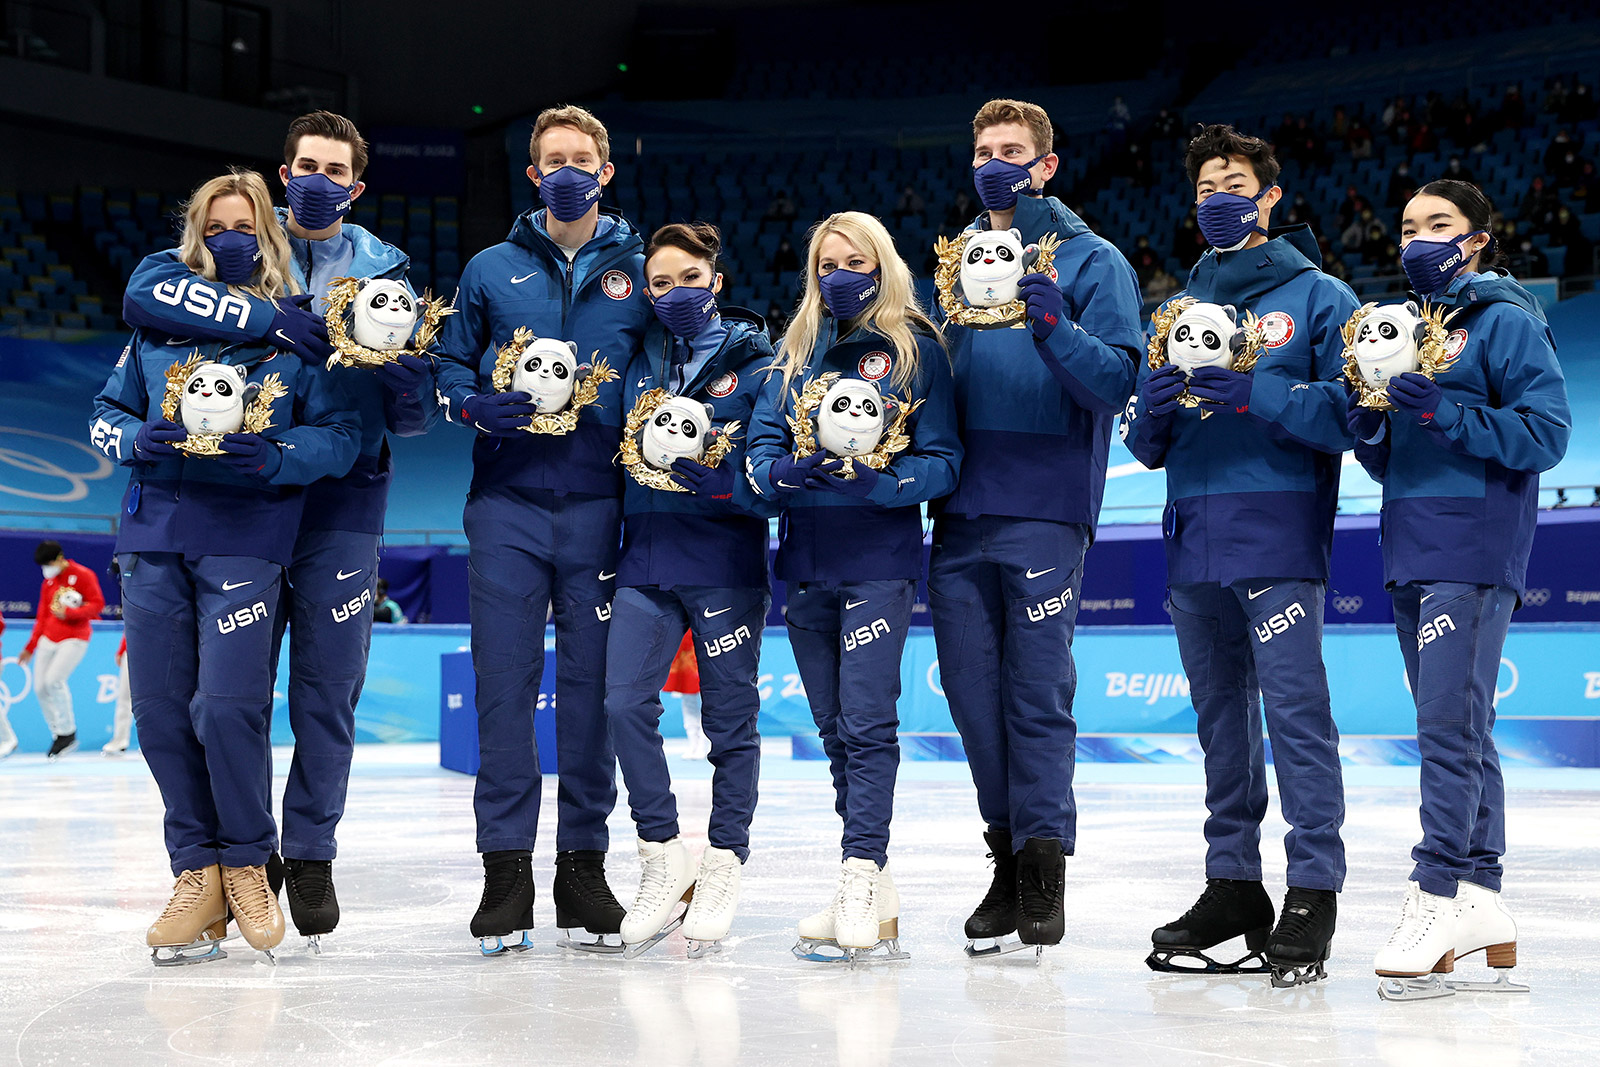 The United States figure skating team poses after winning silver in the team event on Feb. 7.